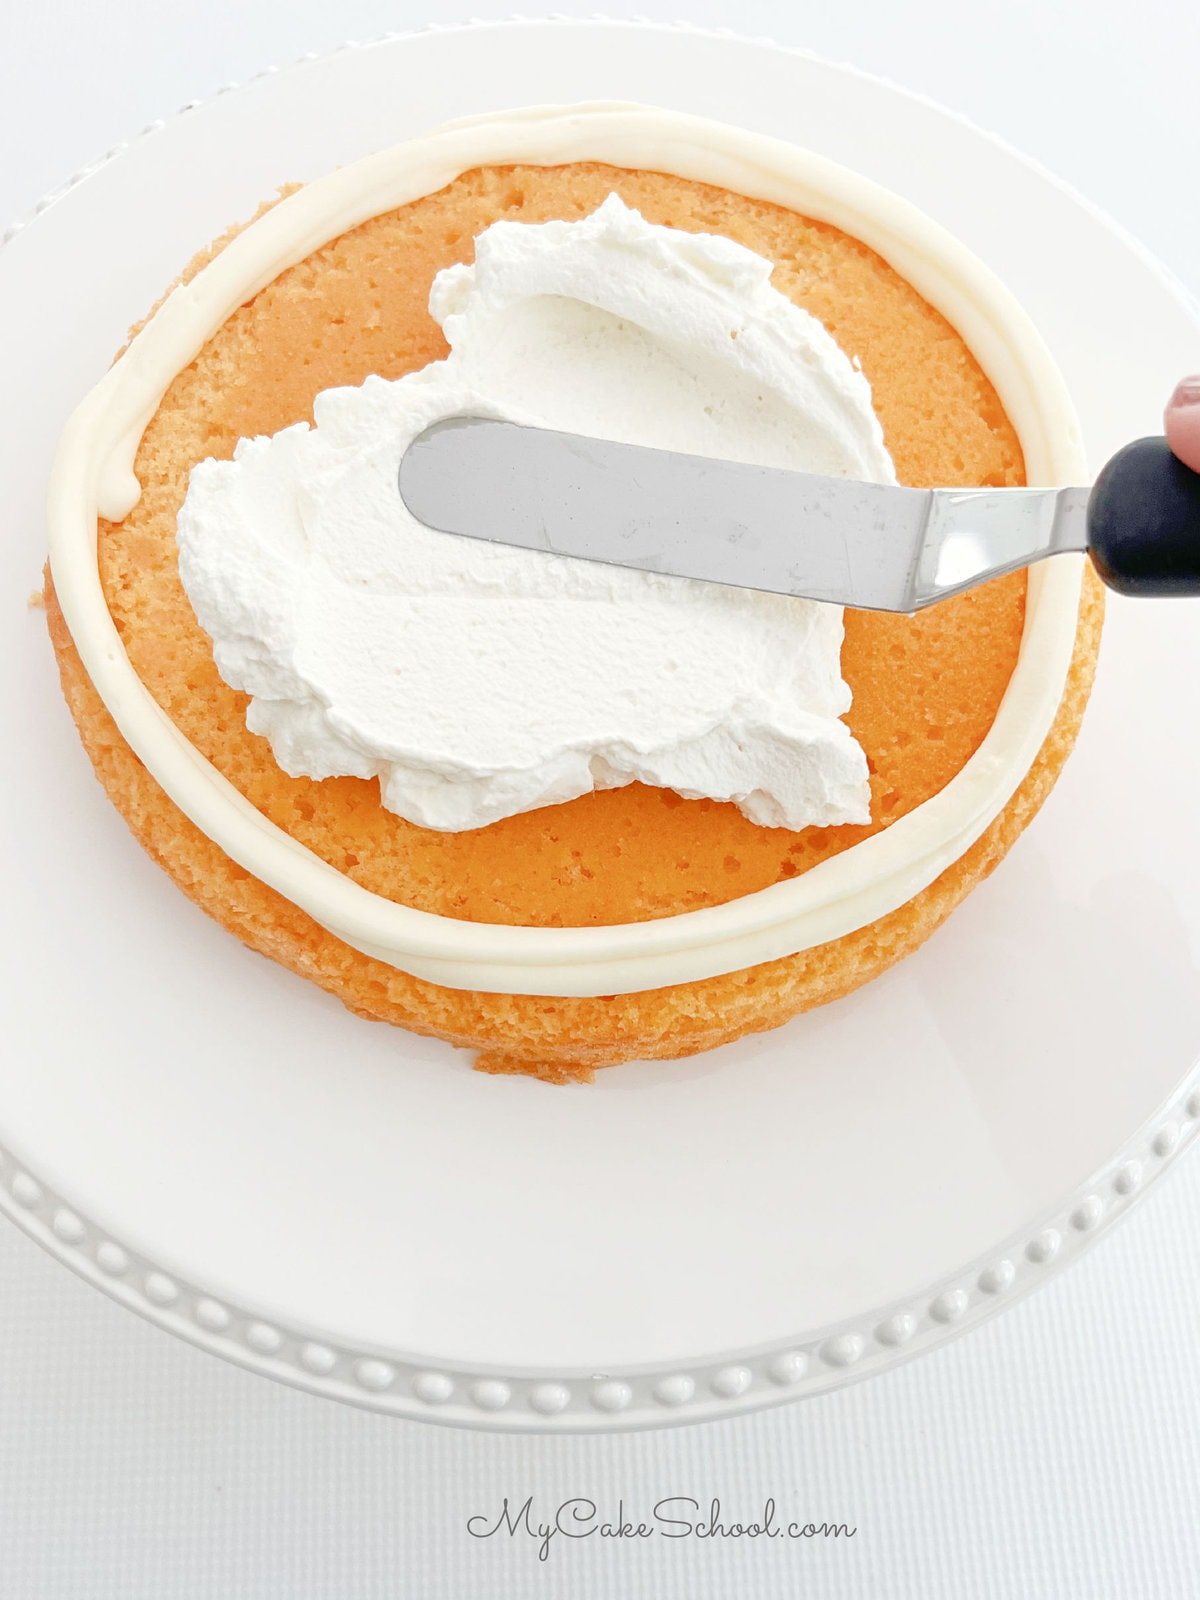 Spreading whipped cream within the frosting dam on the orange cake layer.